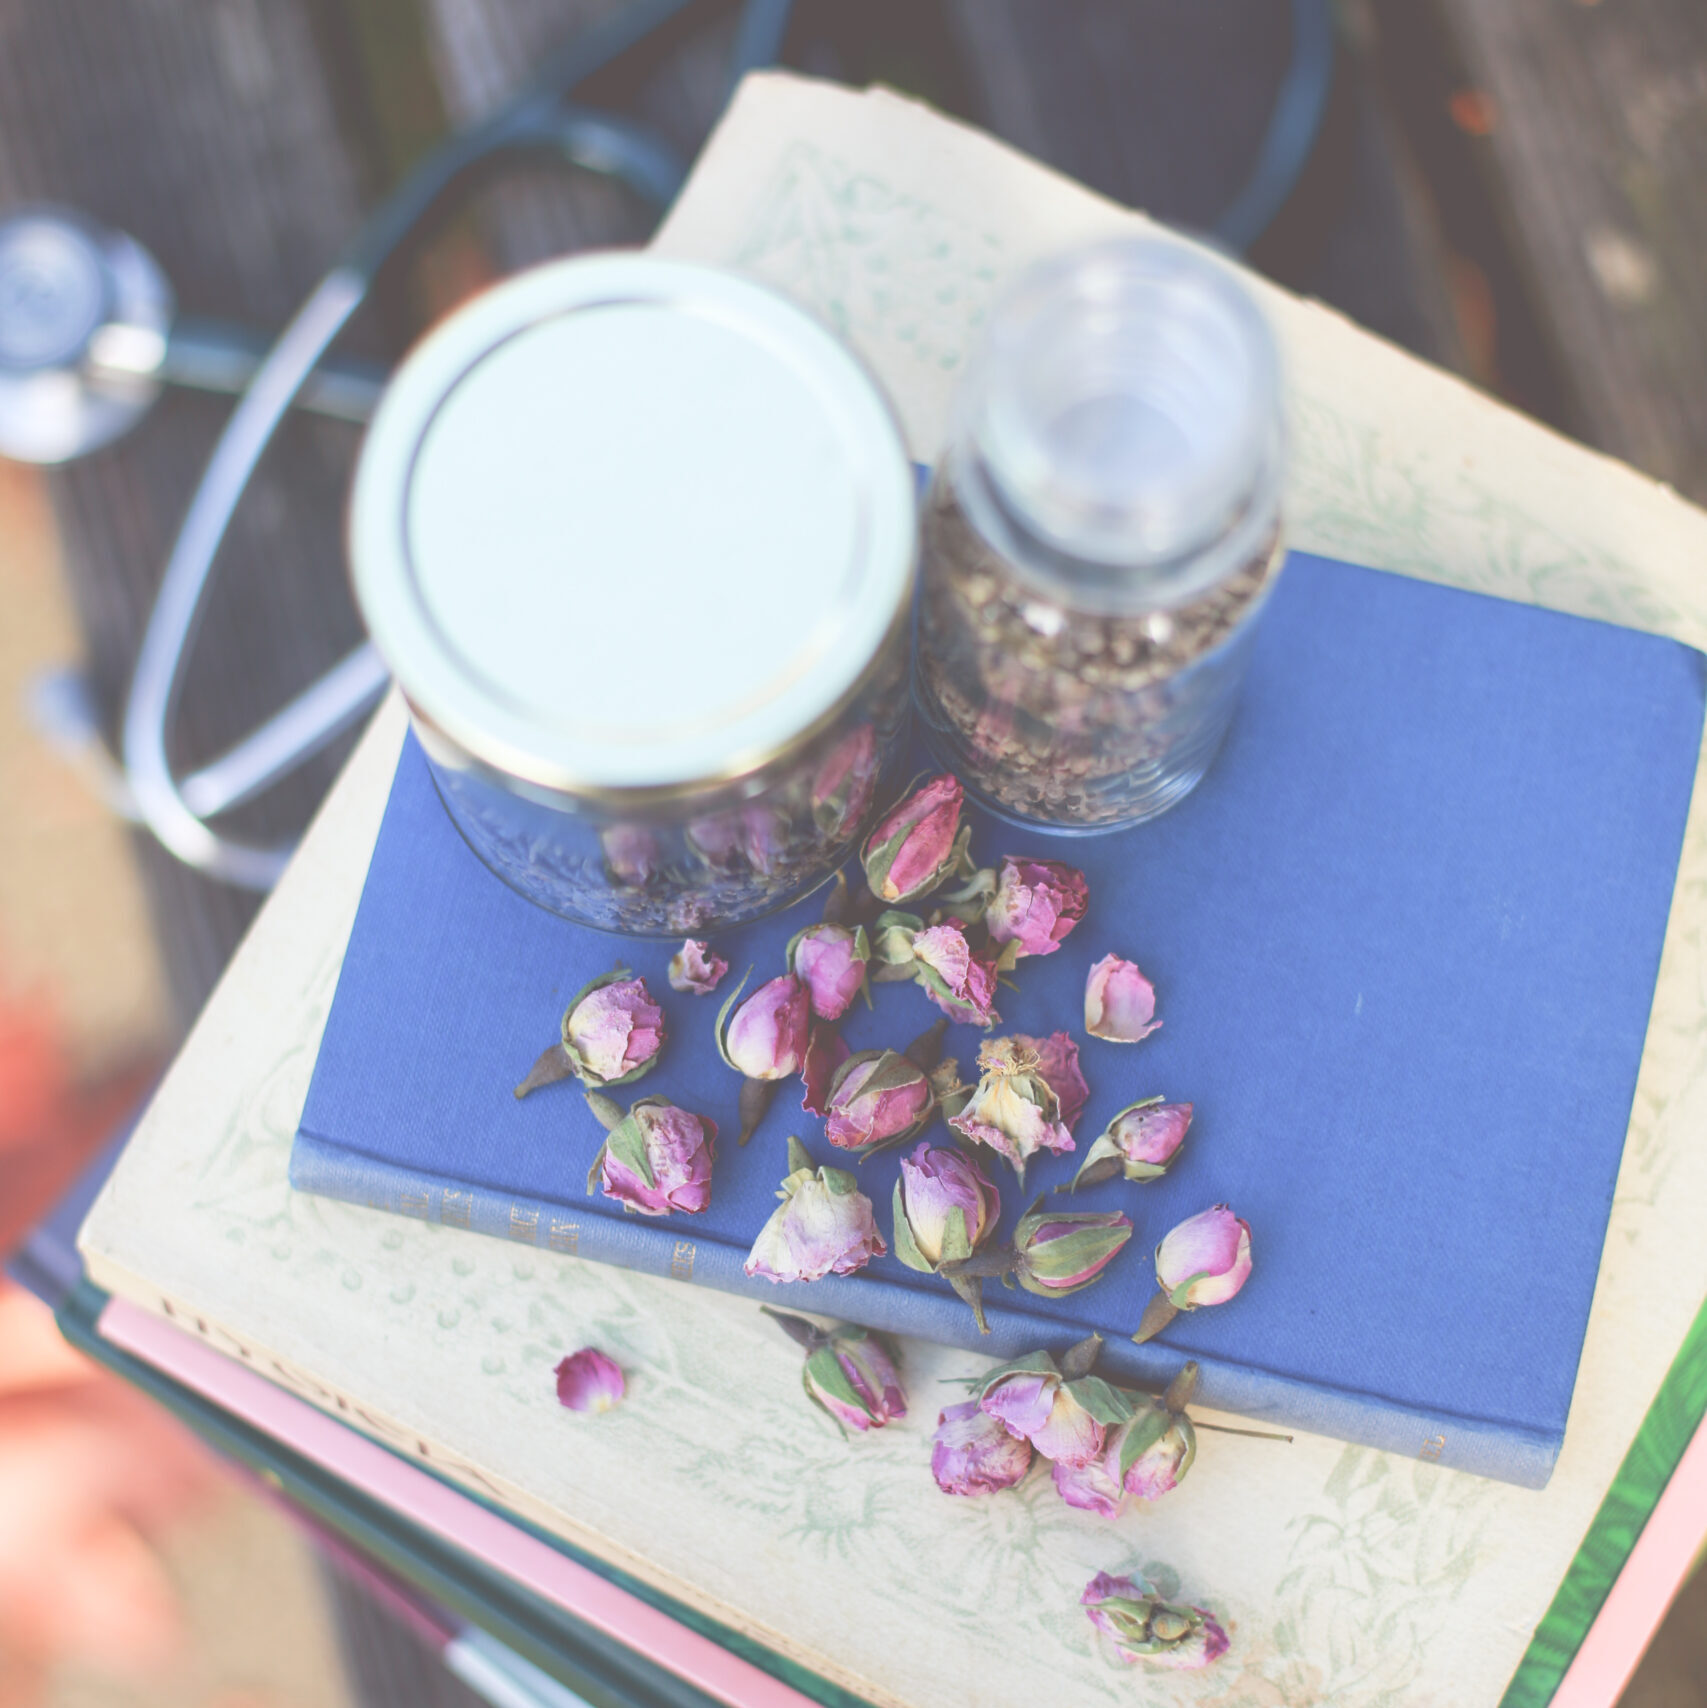 Dried rose buds and herbal remedies on a stack of books with a stethoscope.